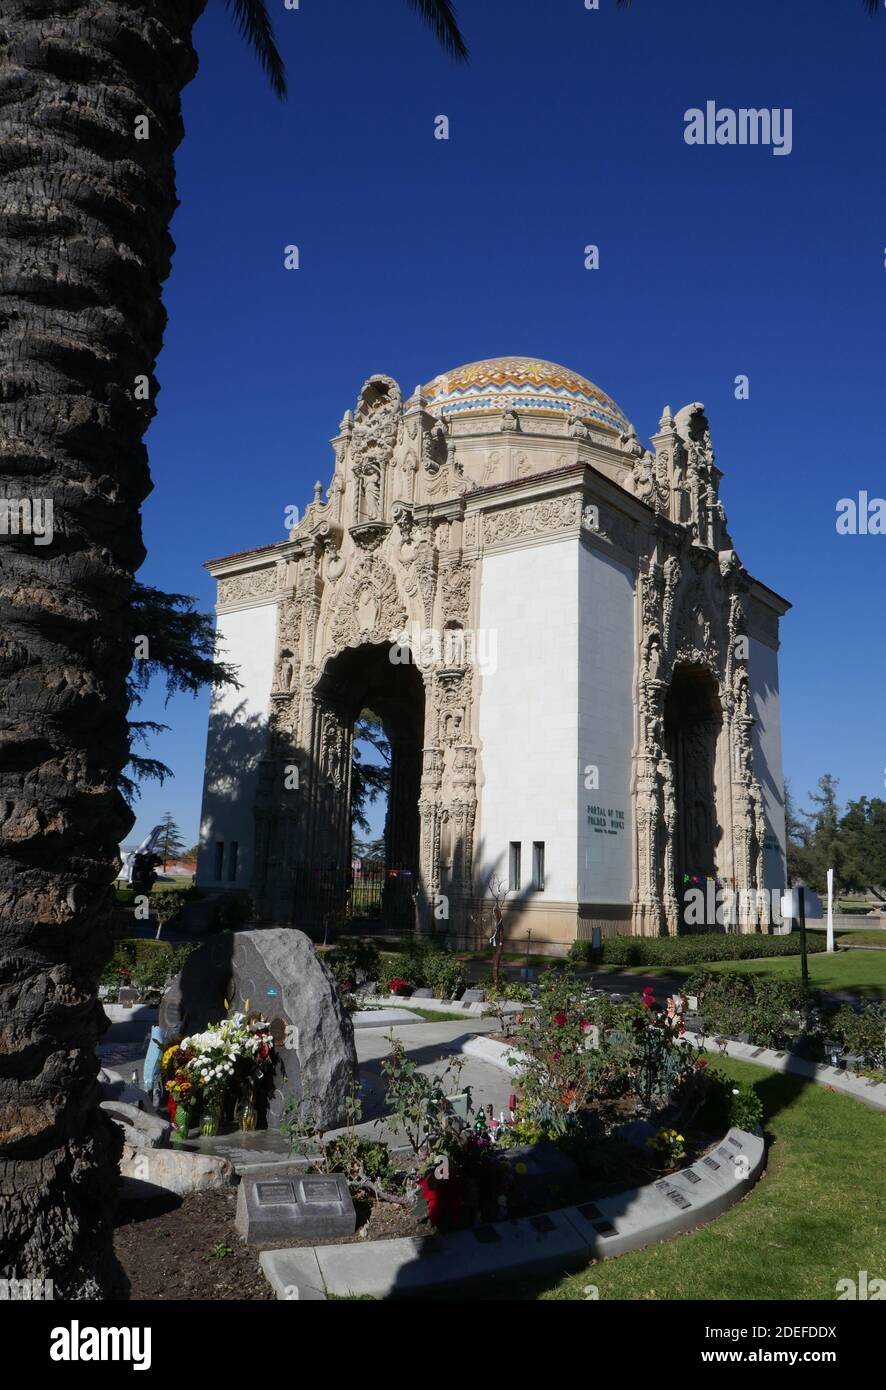 North Hollywood, California, USA 30th November 2020 A general view of atmosphere of Jon-Erik Hexum's Cenotaph and Memorial on November 30, 2020 at Valhalla Memorial Park in North Hollywood, California, USA. Photo by Barry King/Alamy Stock Photo Stock Photo